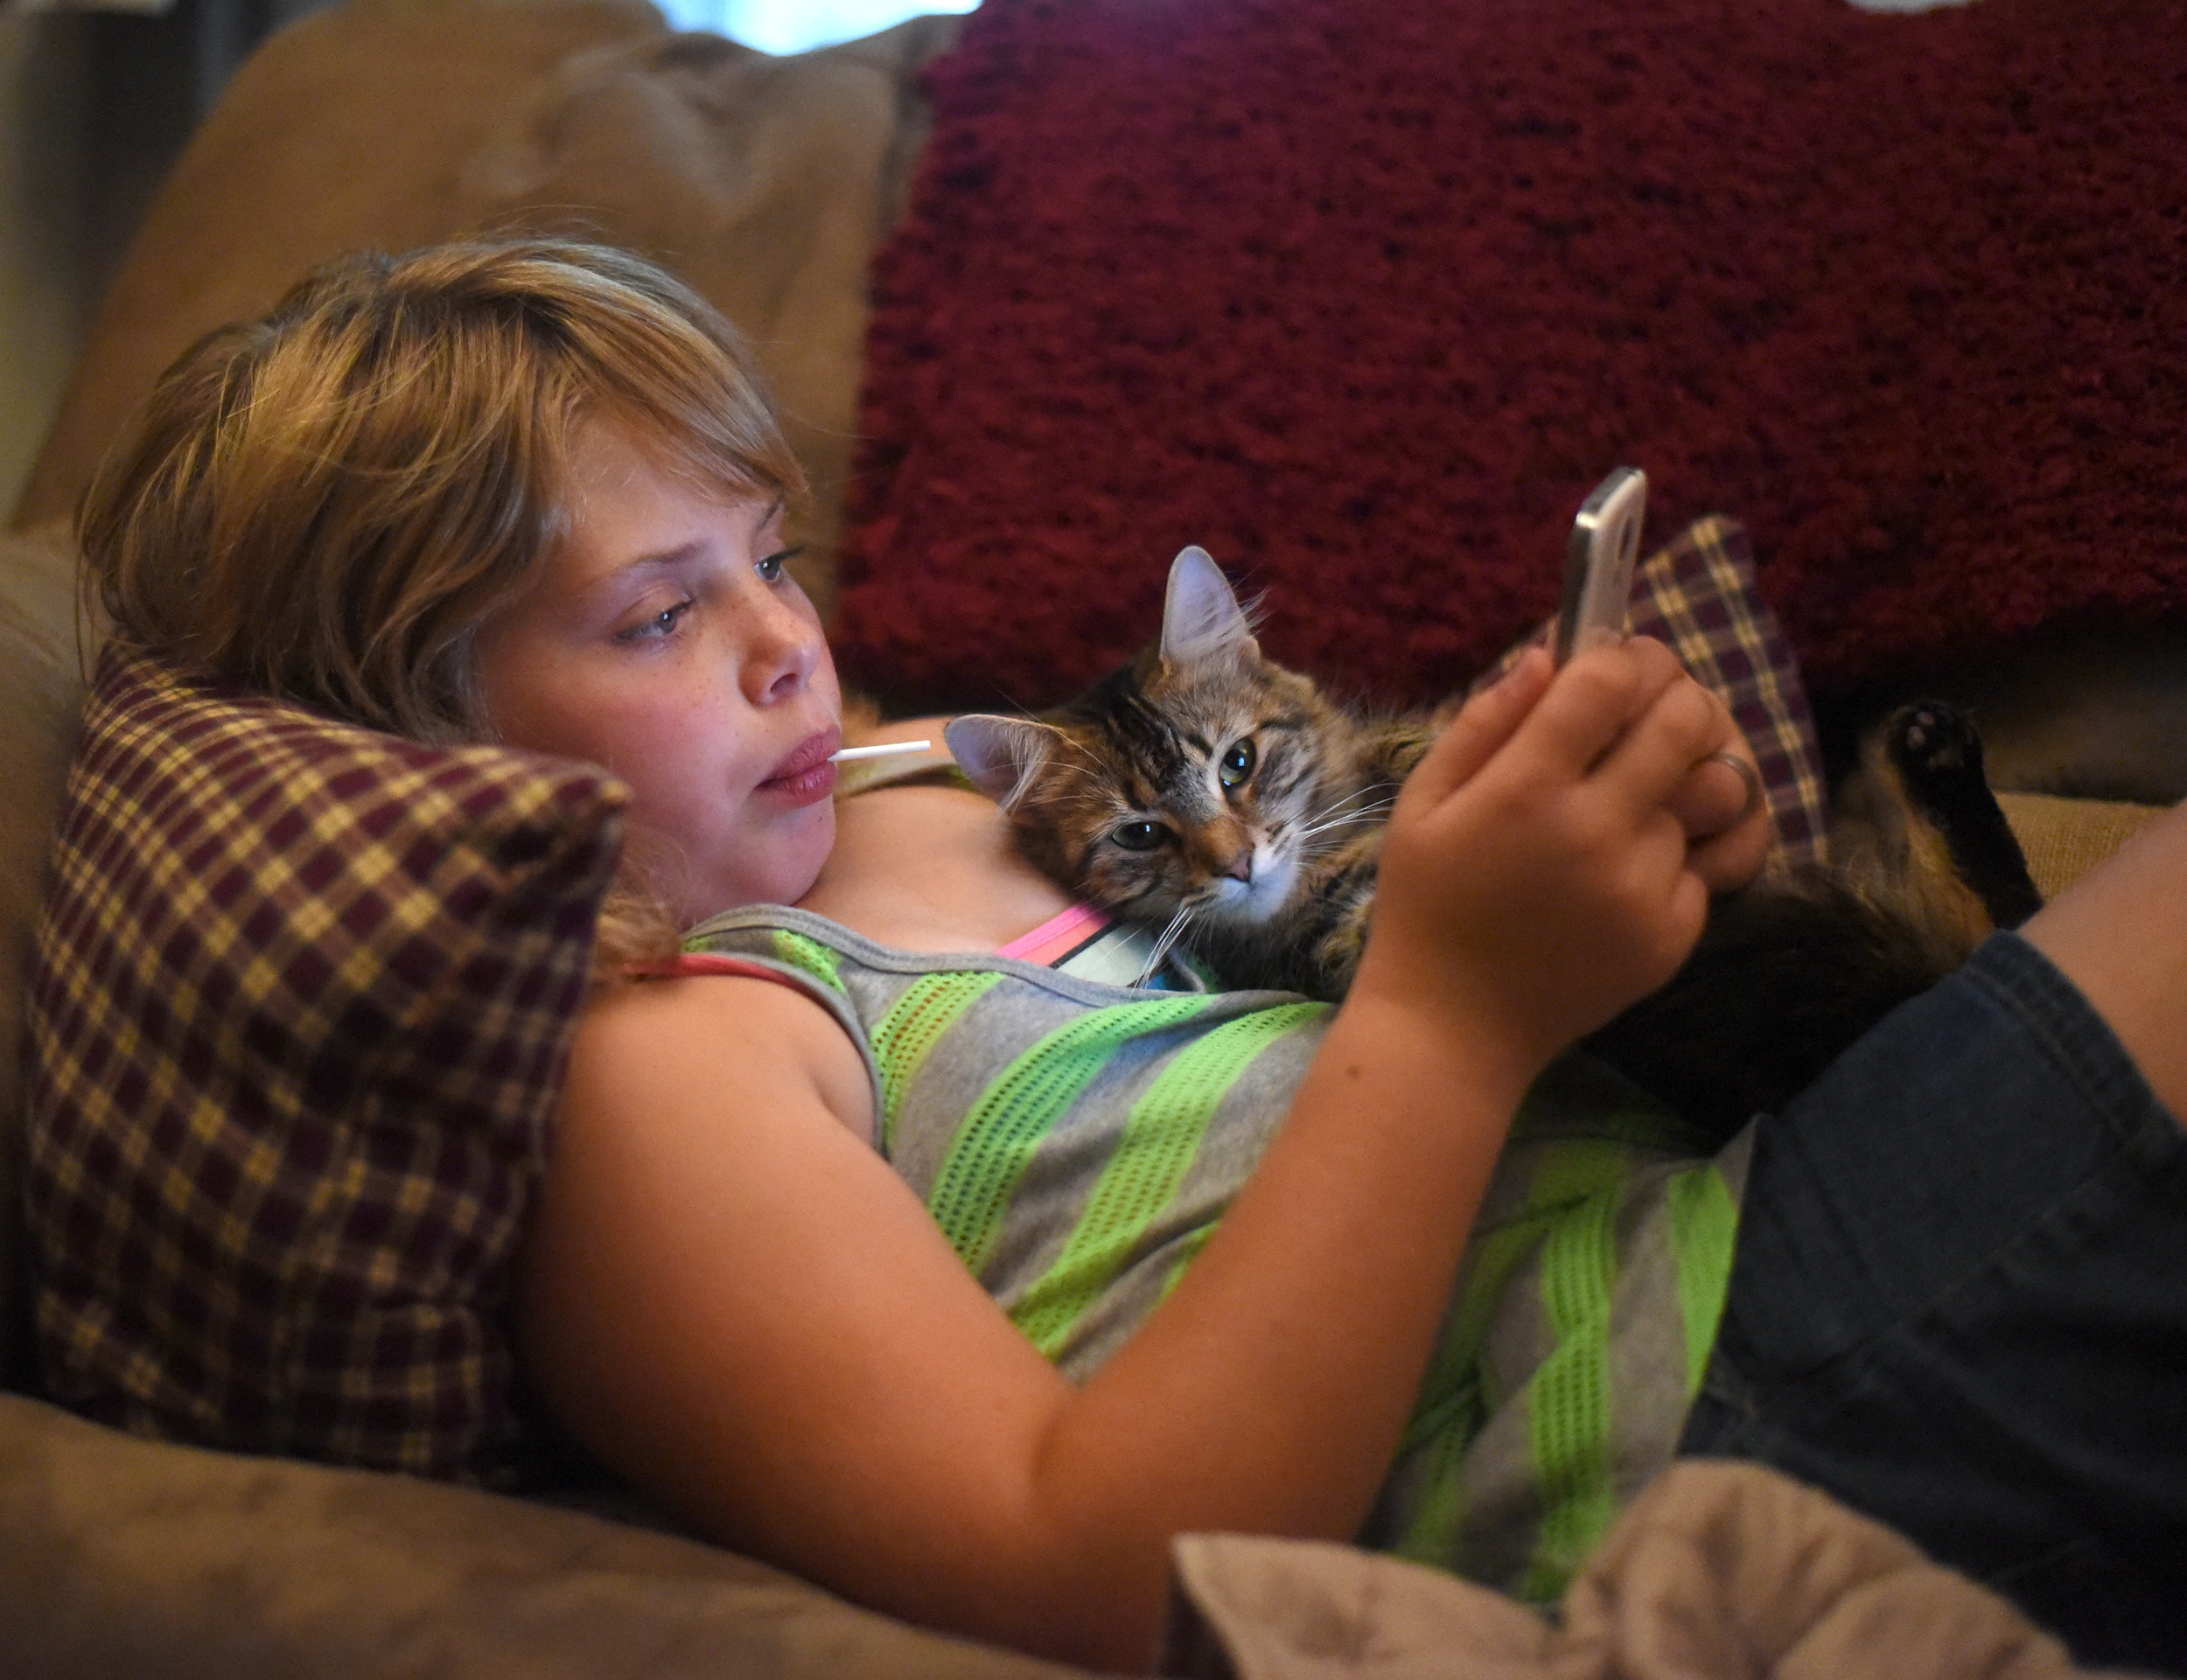  Nine-year-old Alivia Henning, who has autism, lays on her couch with her cat, Elsa, while playing on a cell phone at her home Sept. 22, 2016.&nbsp; 